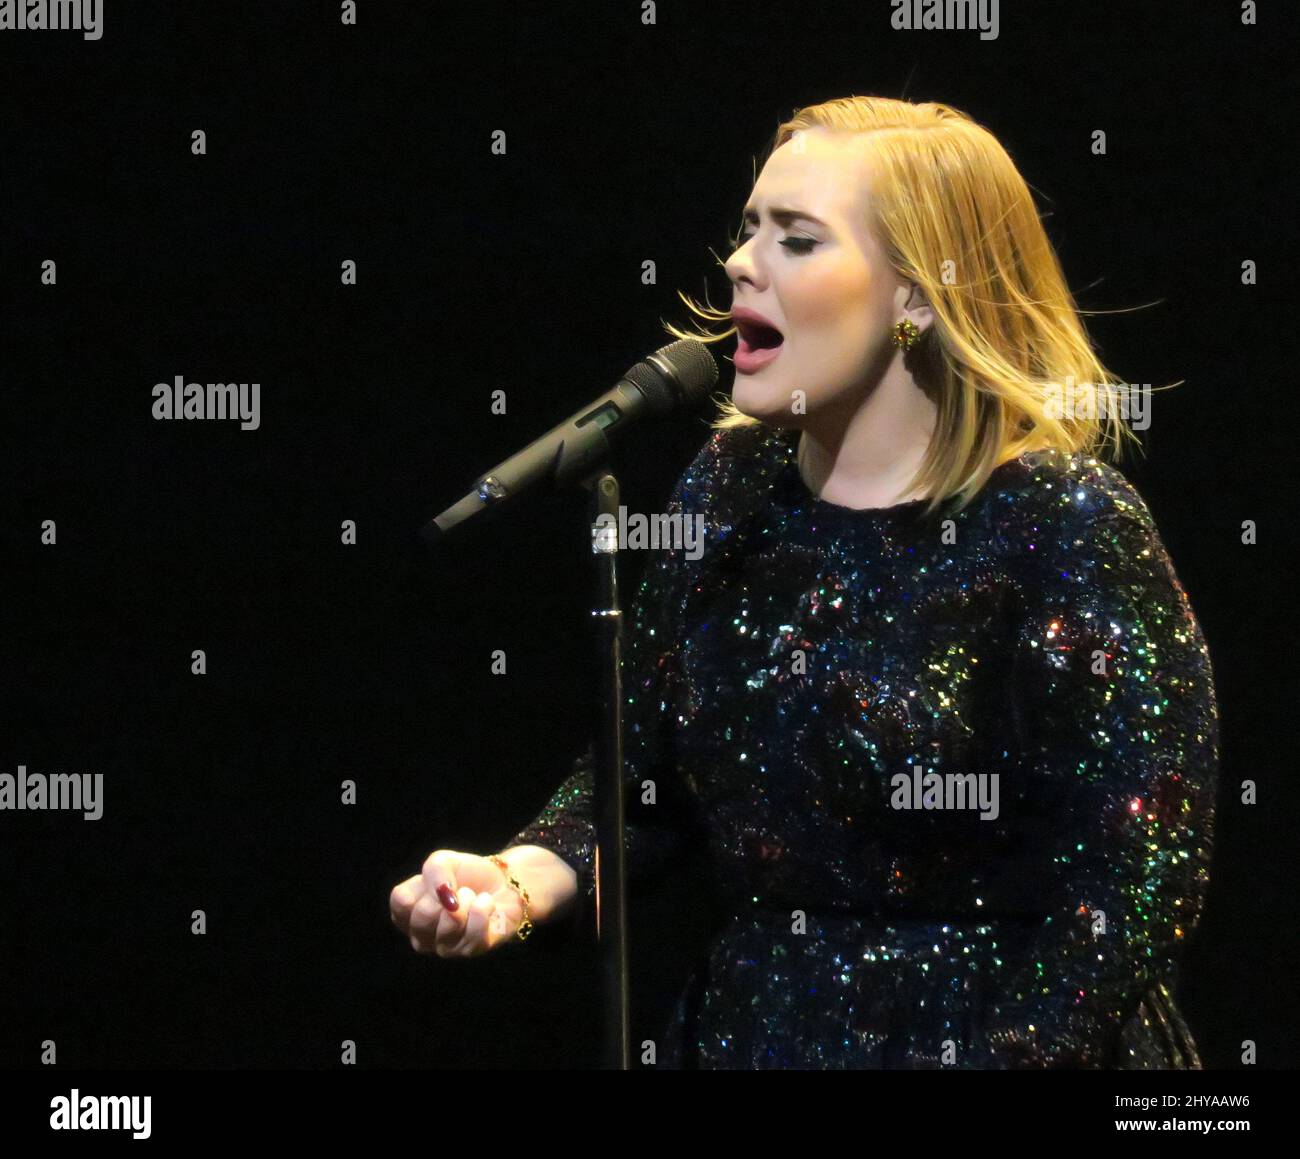 Adele performs during her 25 World Tour at Staples Center in Los Angeles, California. Stock Photo